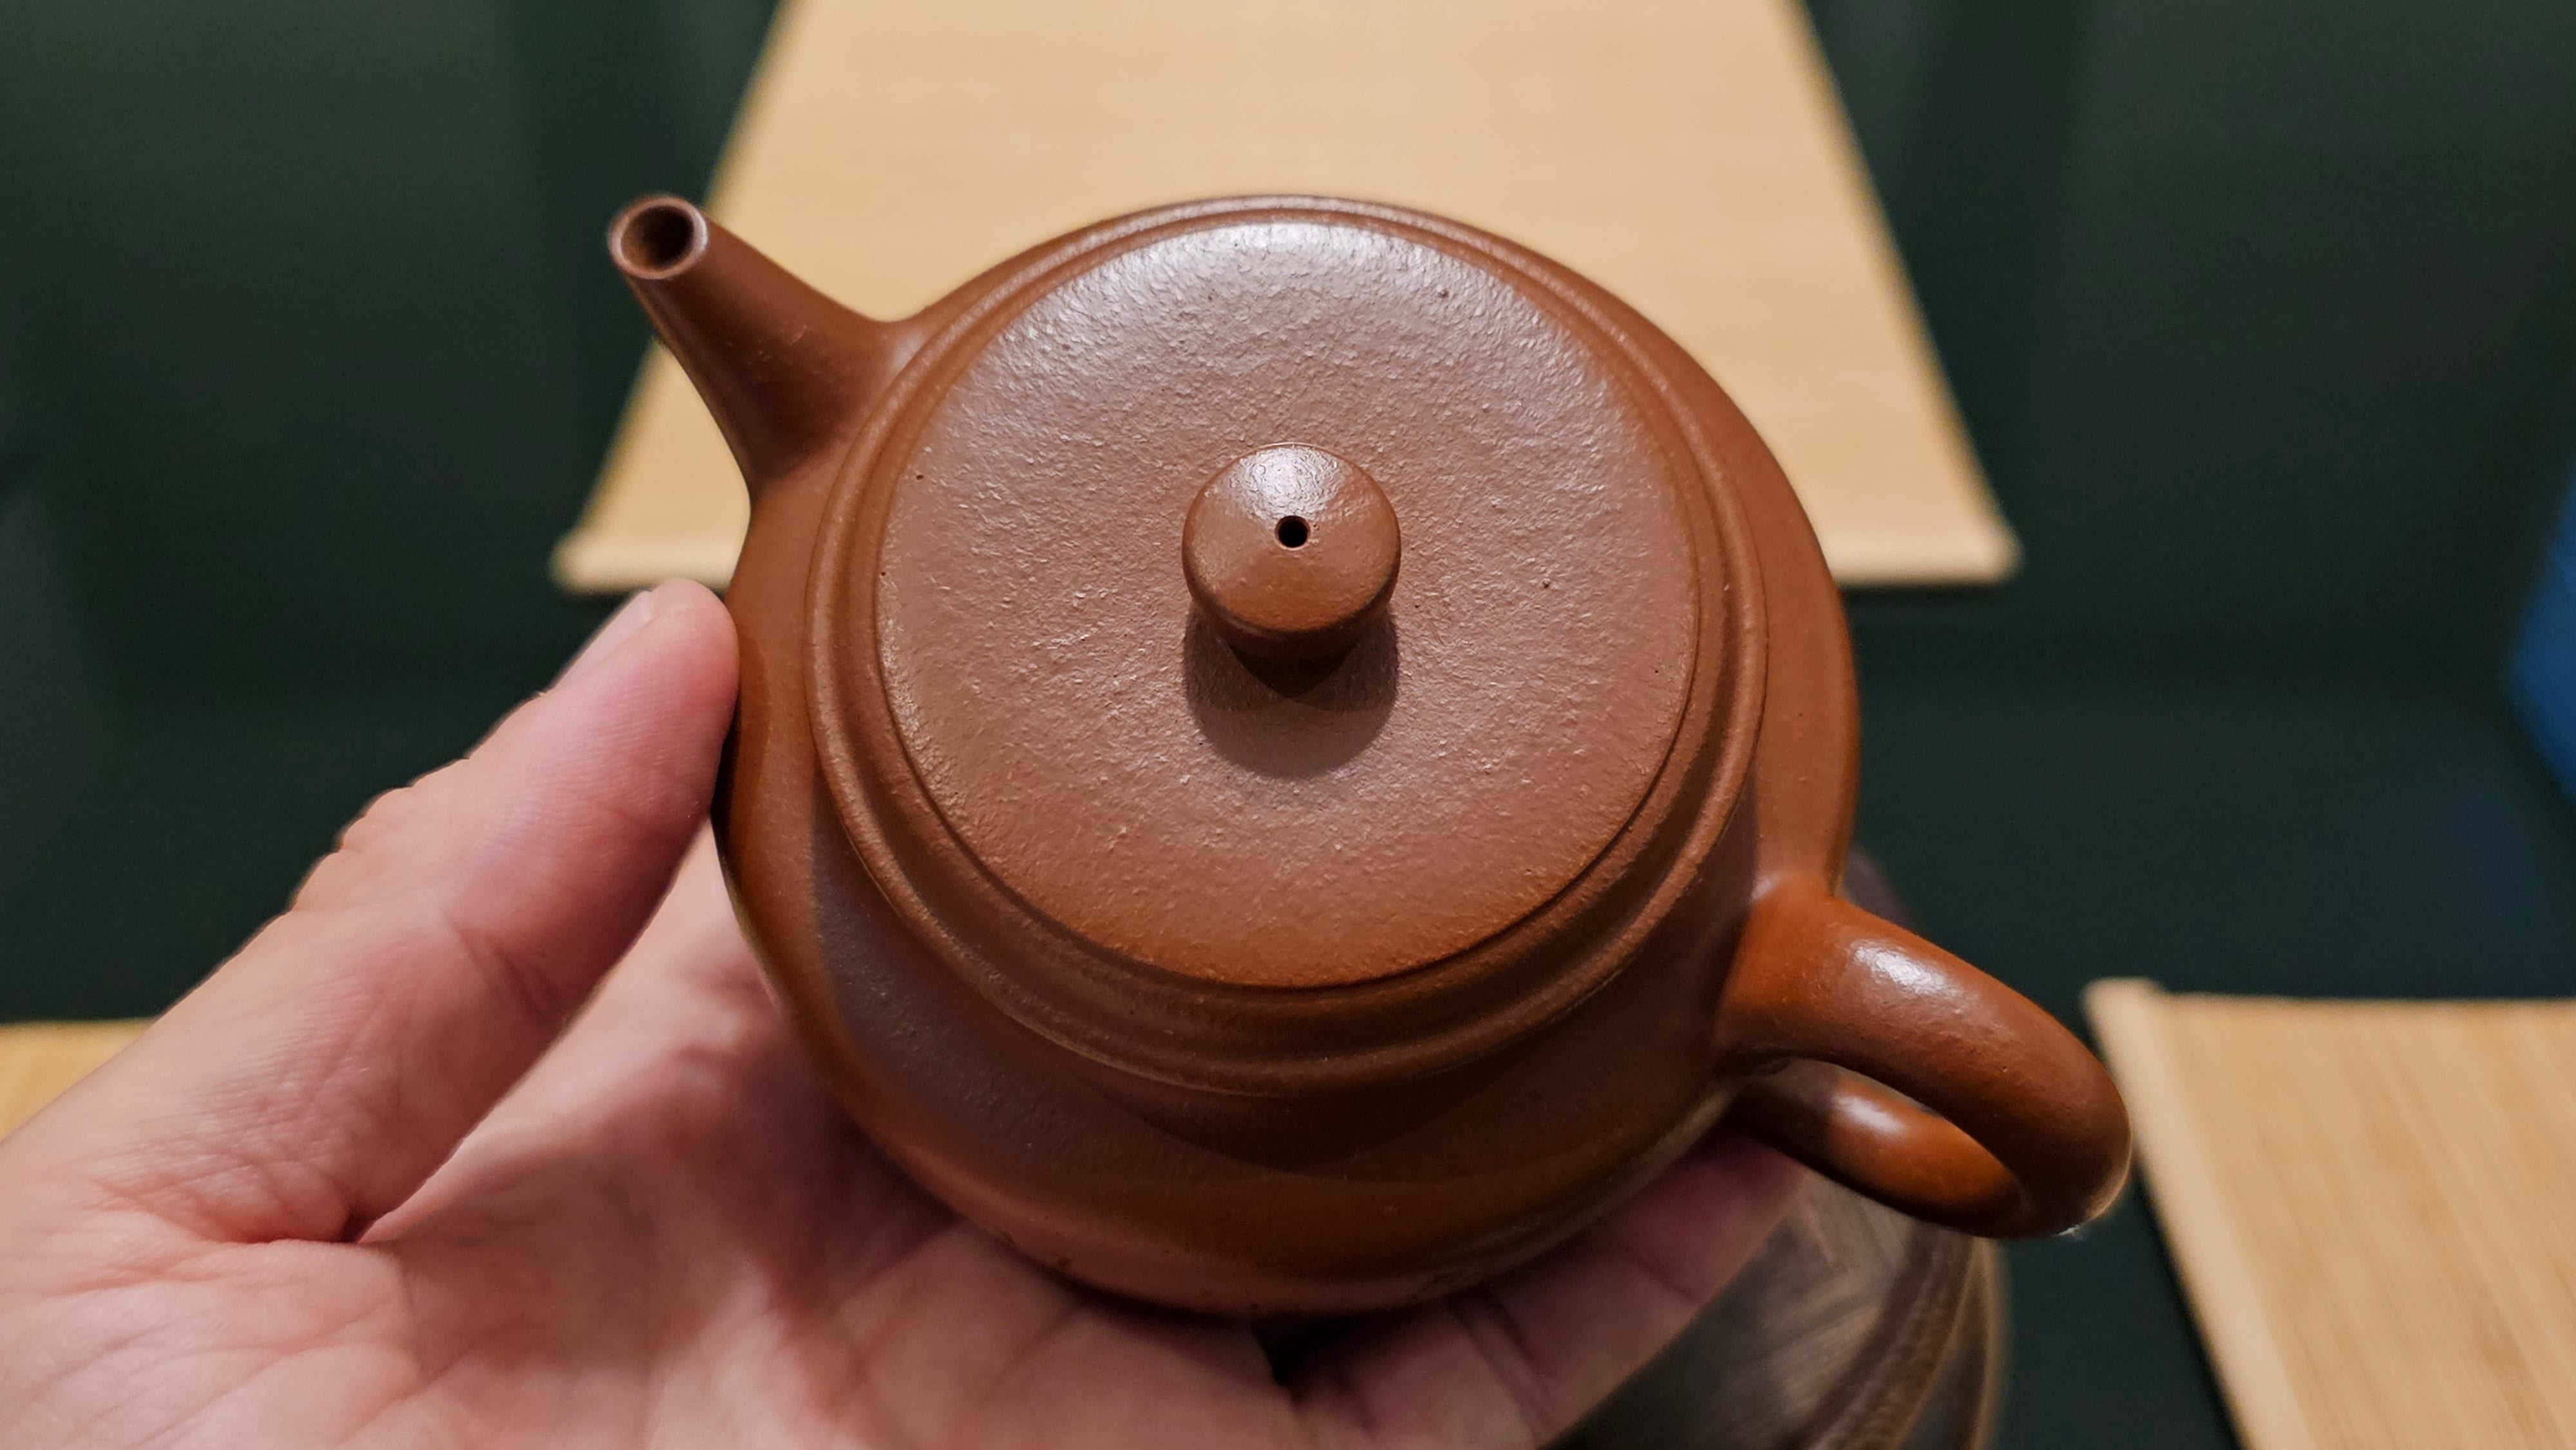 De Zhong 德钟, Yuan Kuang Da Hong Pao 原矿大红袍, made by L2 Senior Master Cao Lan Fang 国家高级工艺美术师～曹兰芳。- commissioned in Jan 2022 for our esteemed Patron Prof Johnston (Melbourne), Shown here for viewing.